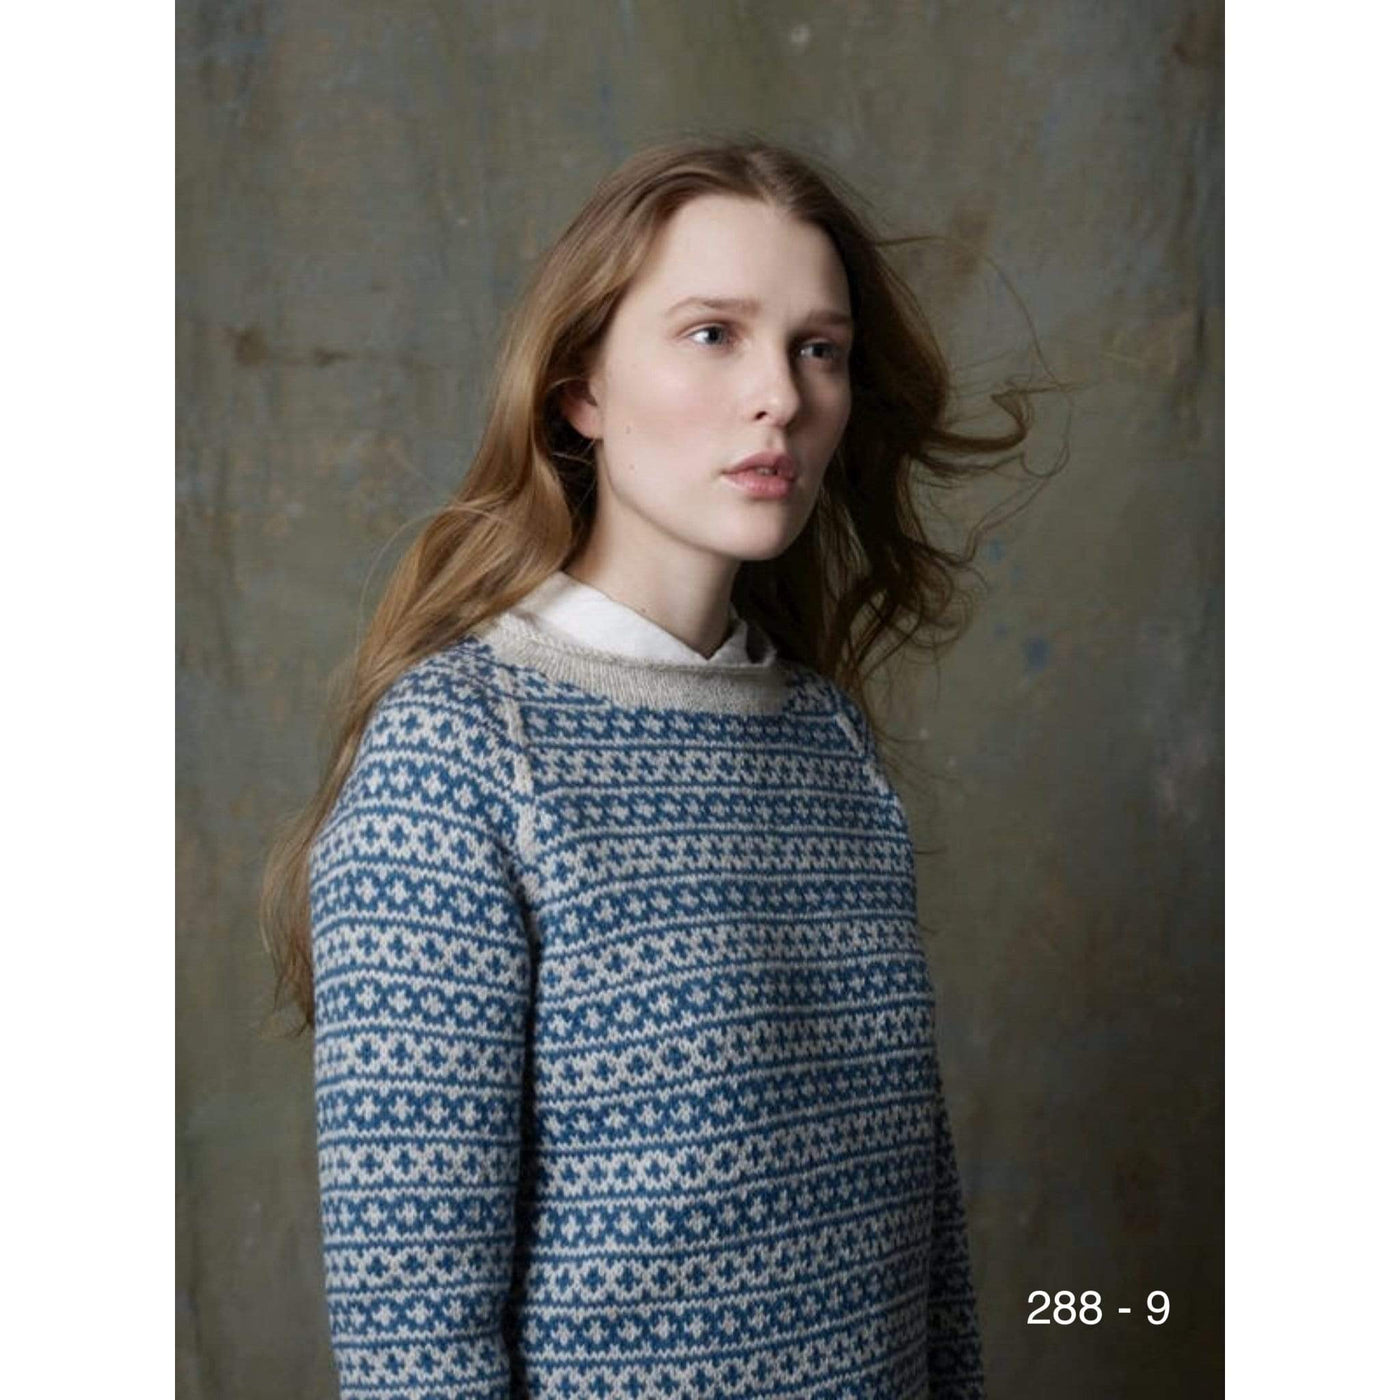 A woman in an overall colorwork pullover knit in Rauma Strikkegarn using pattern 288-9.